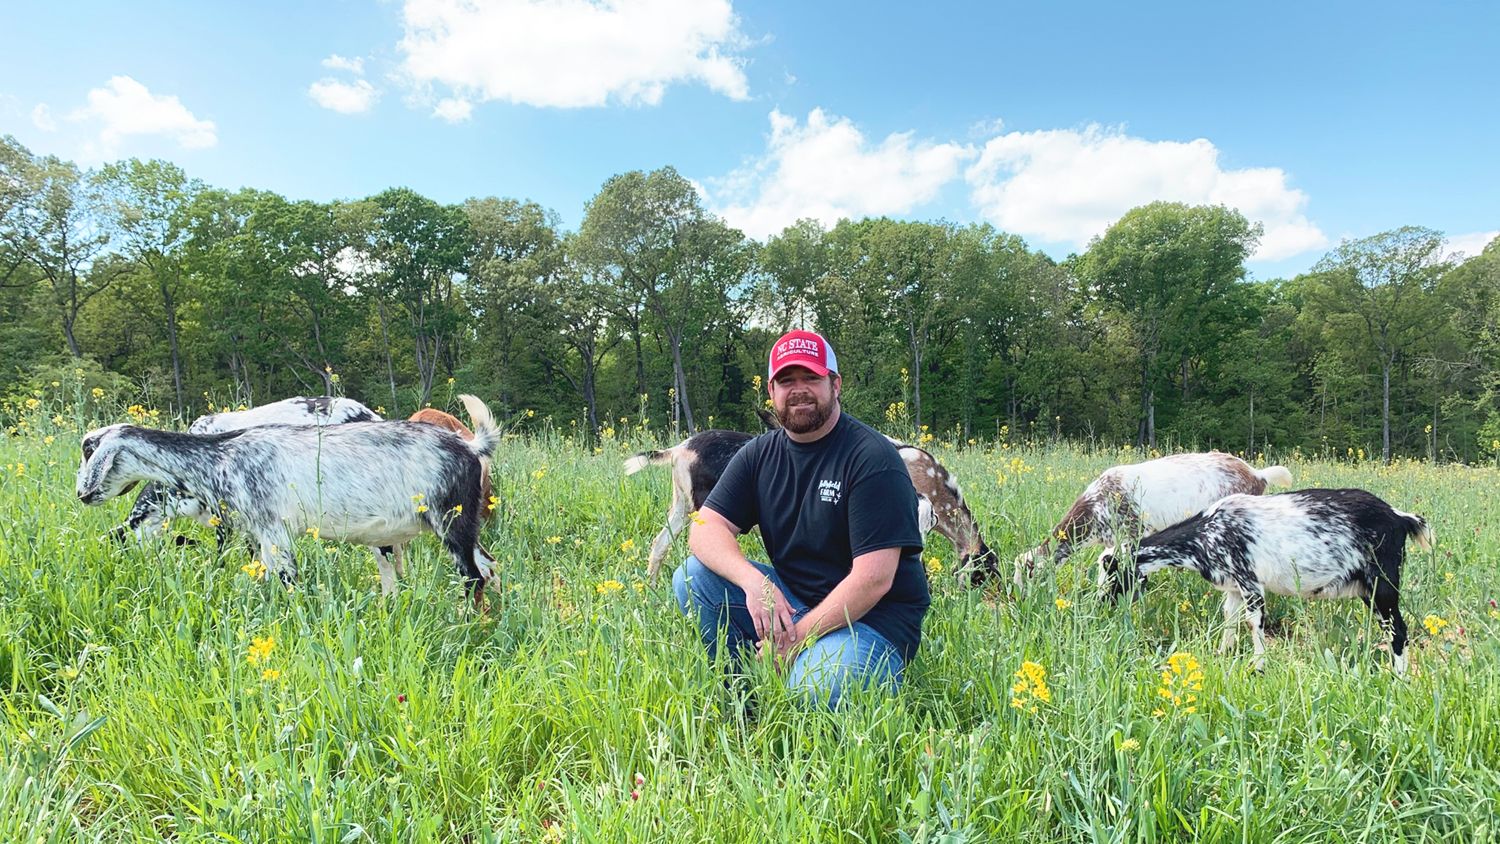 Jonas Asbill in a field with goats